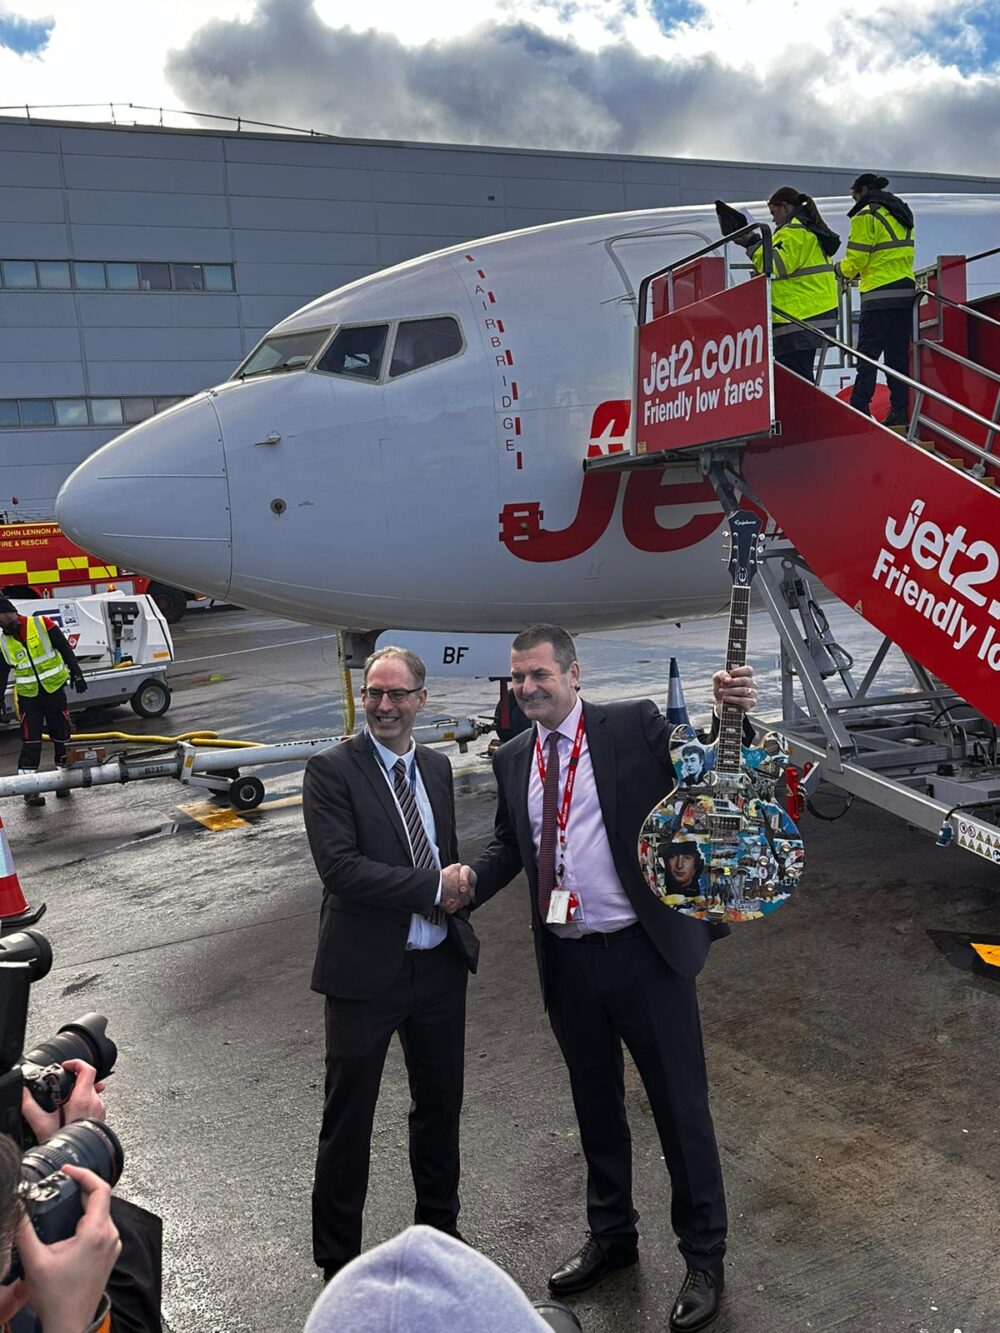 LJLA present Jet2 with a decorated guitar to symbolise Liverpool's musical heritage.